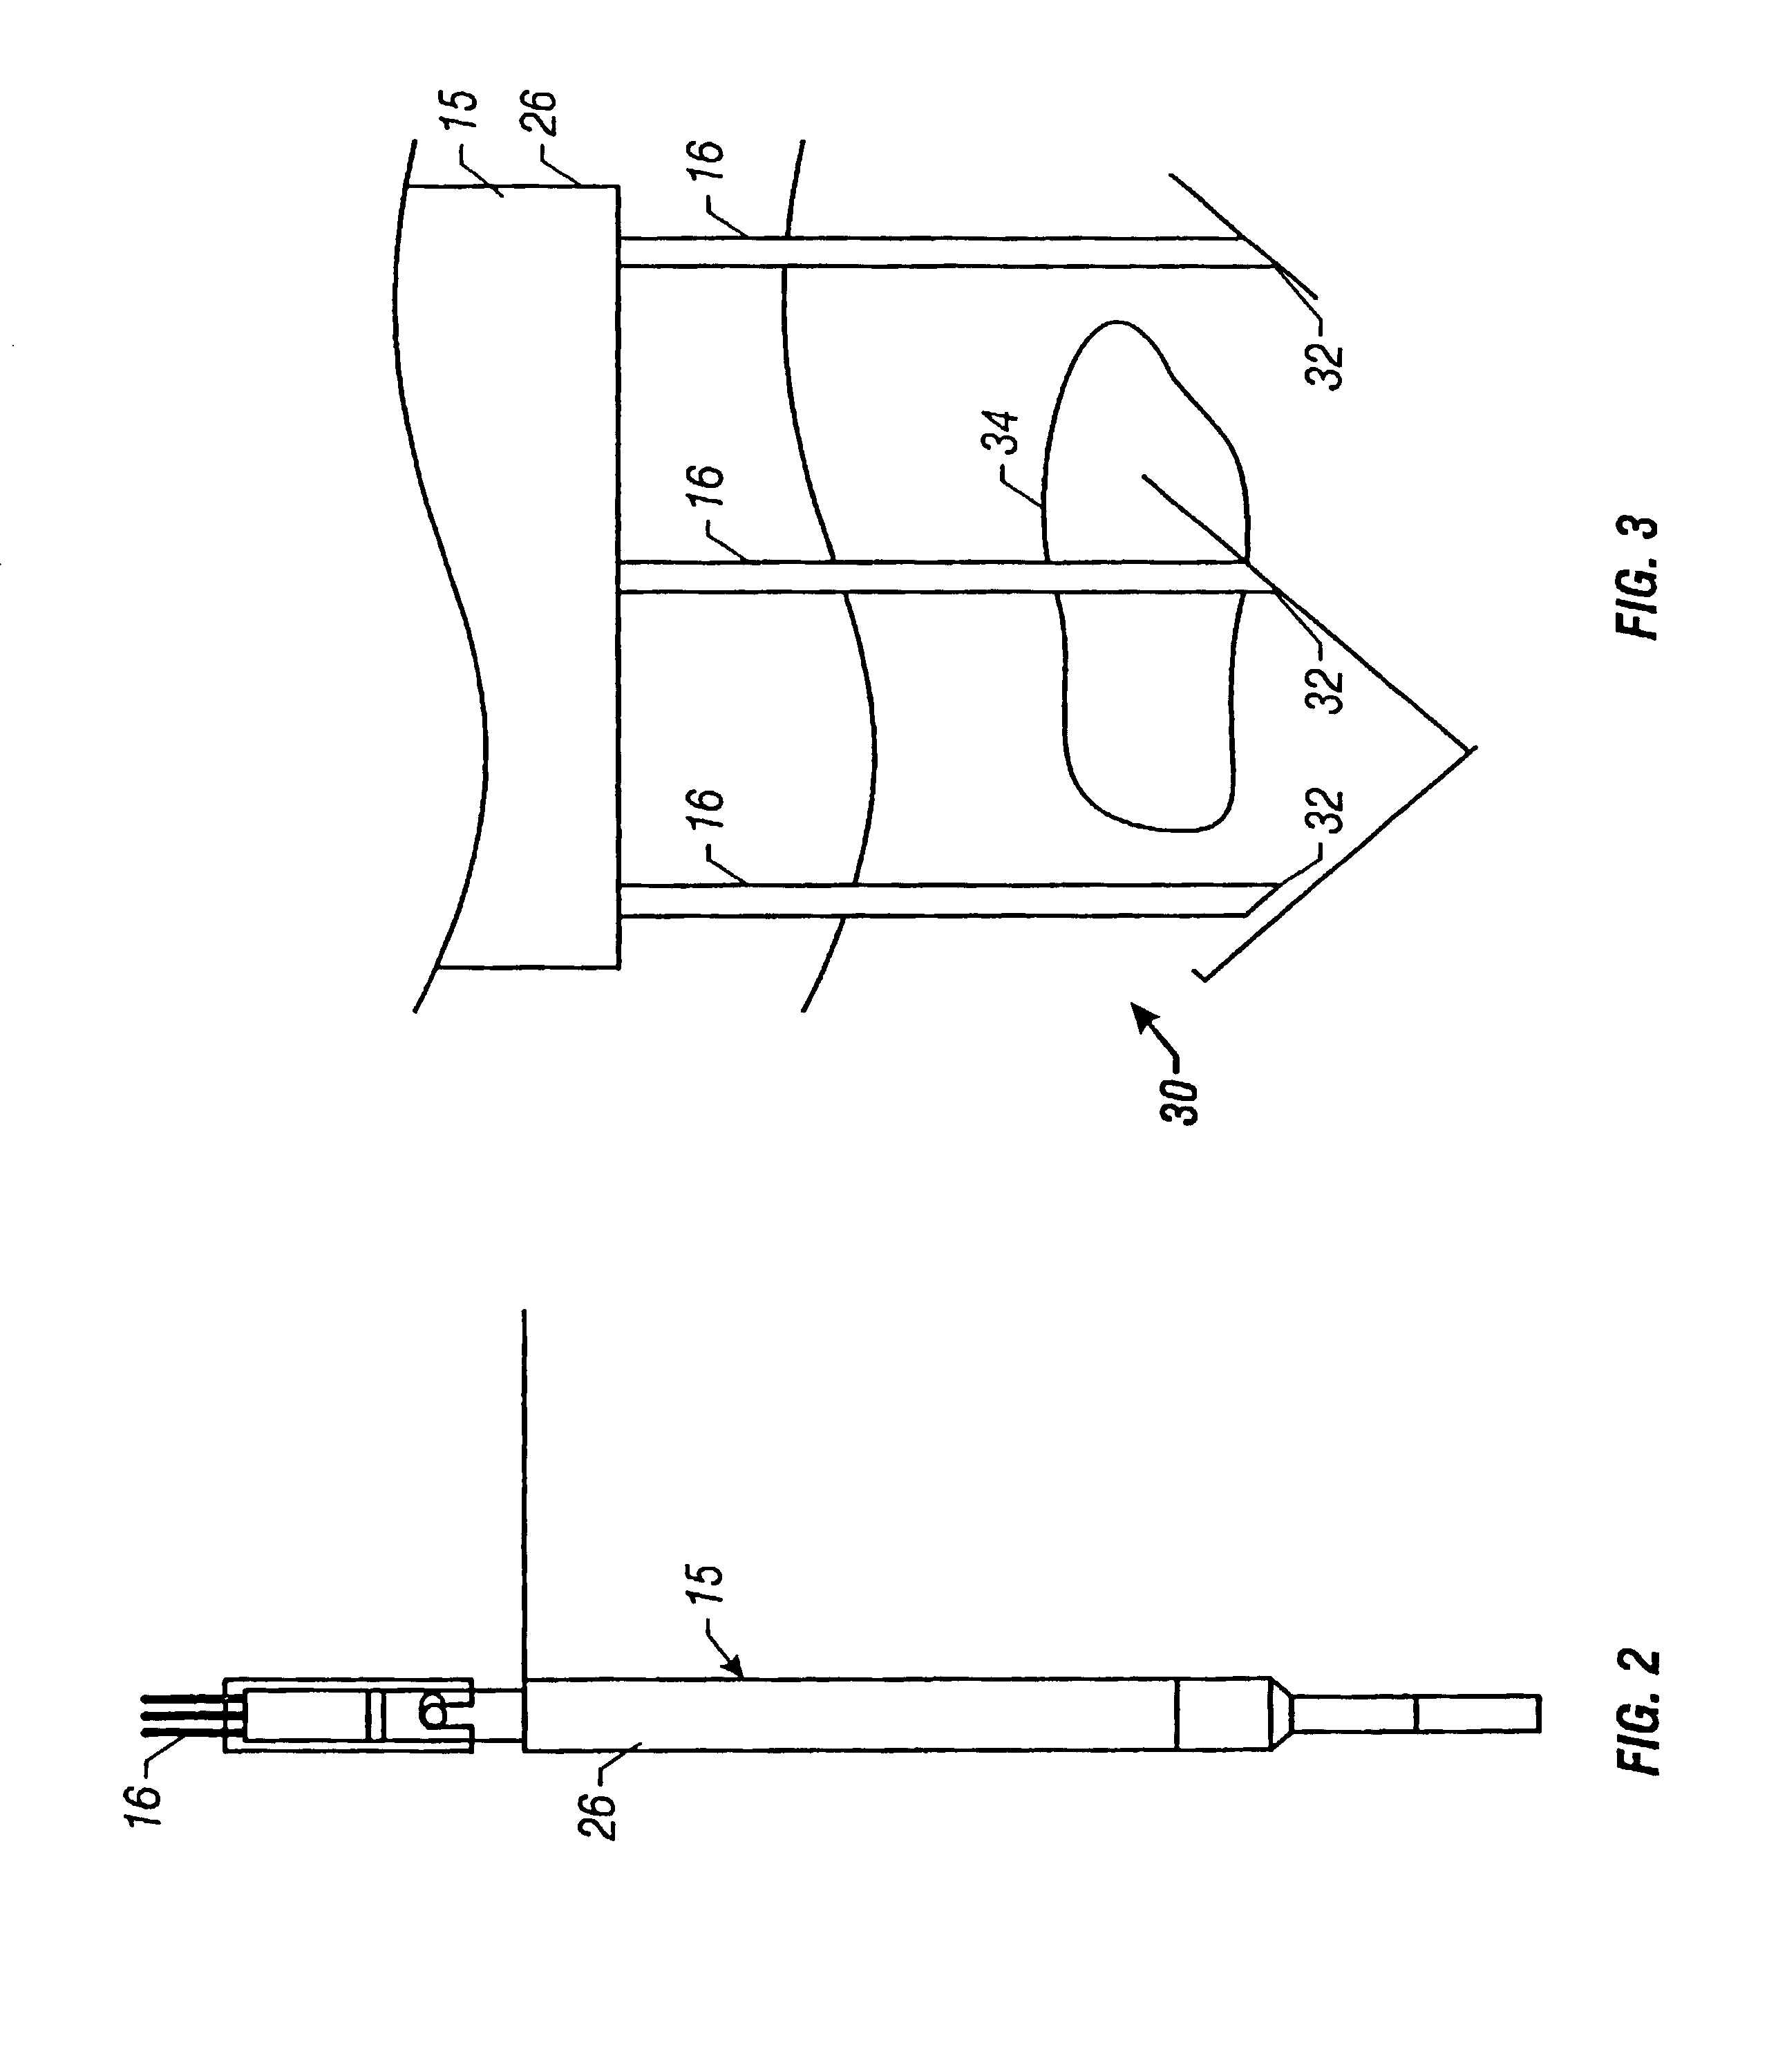 Method and apparatus for reducing electroporation-mediated muscle reaction and pain response